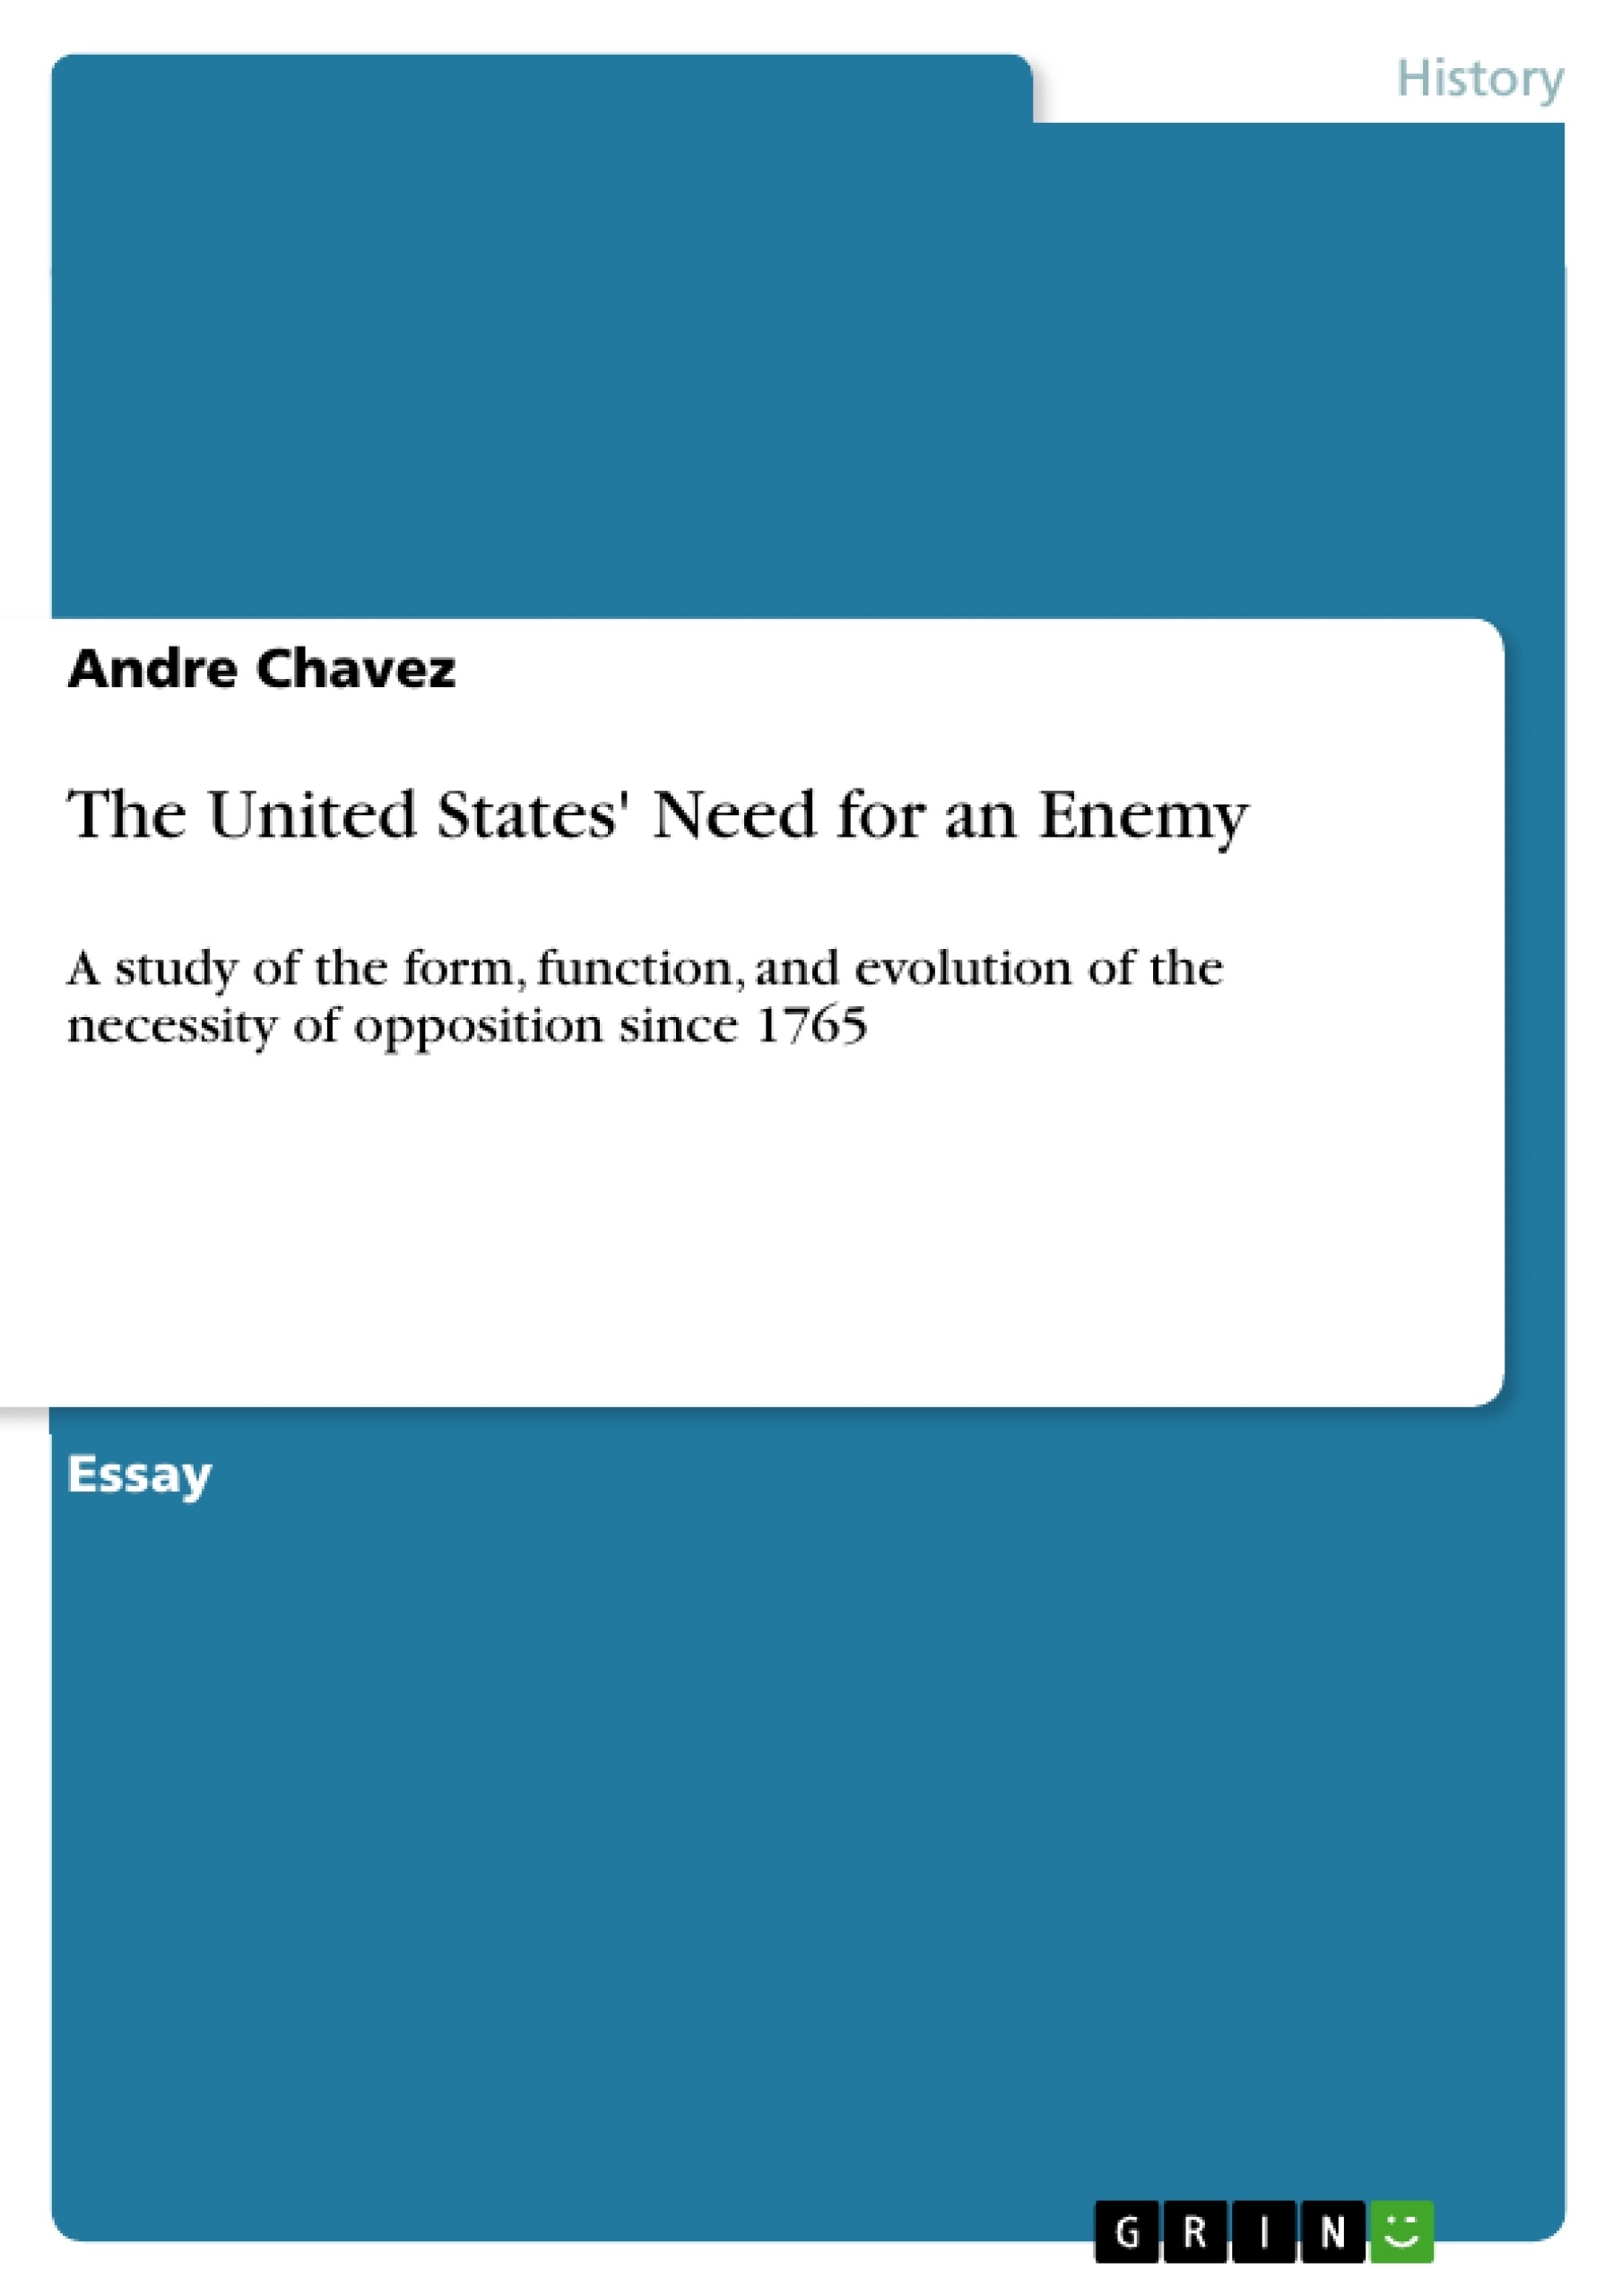 Título: The United States' Need for an Enemy